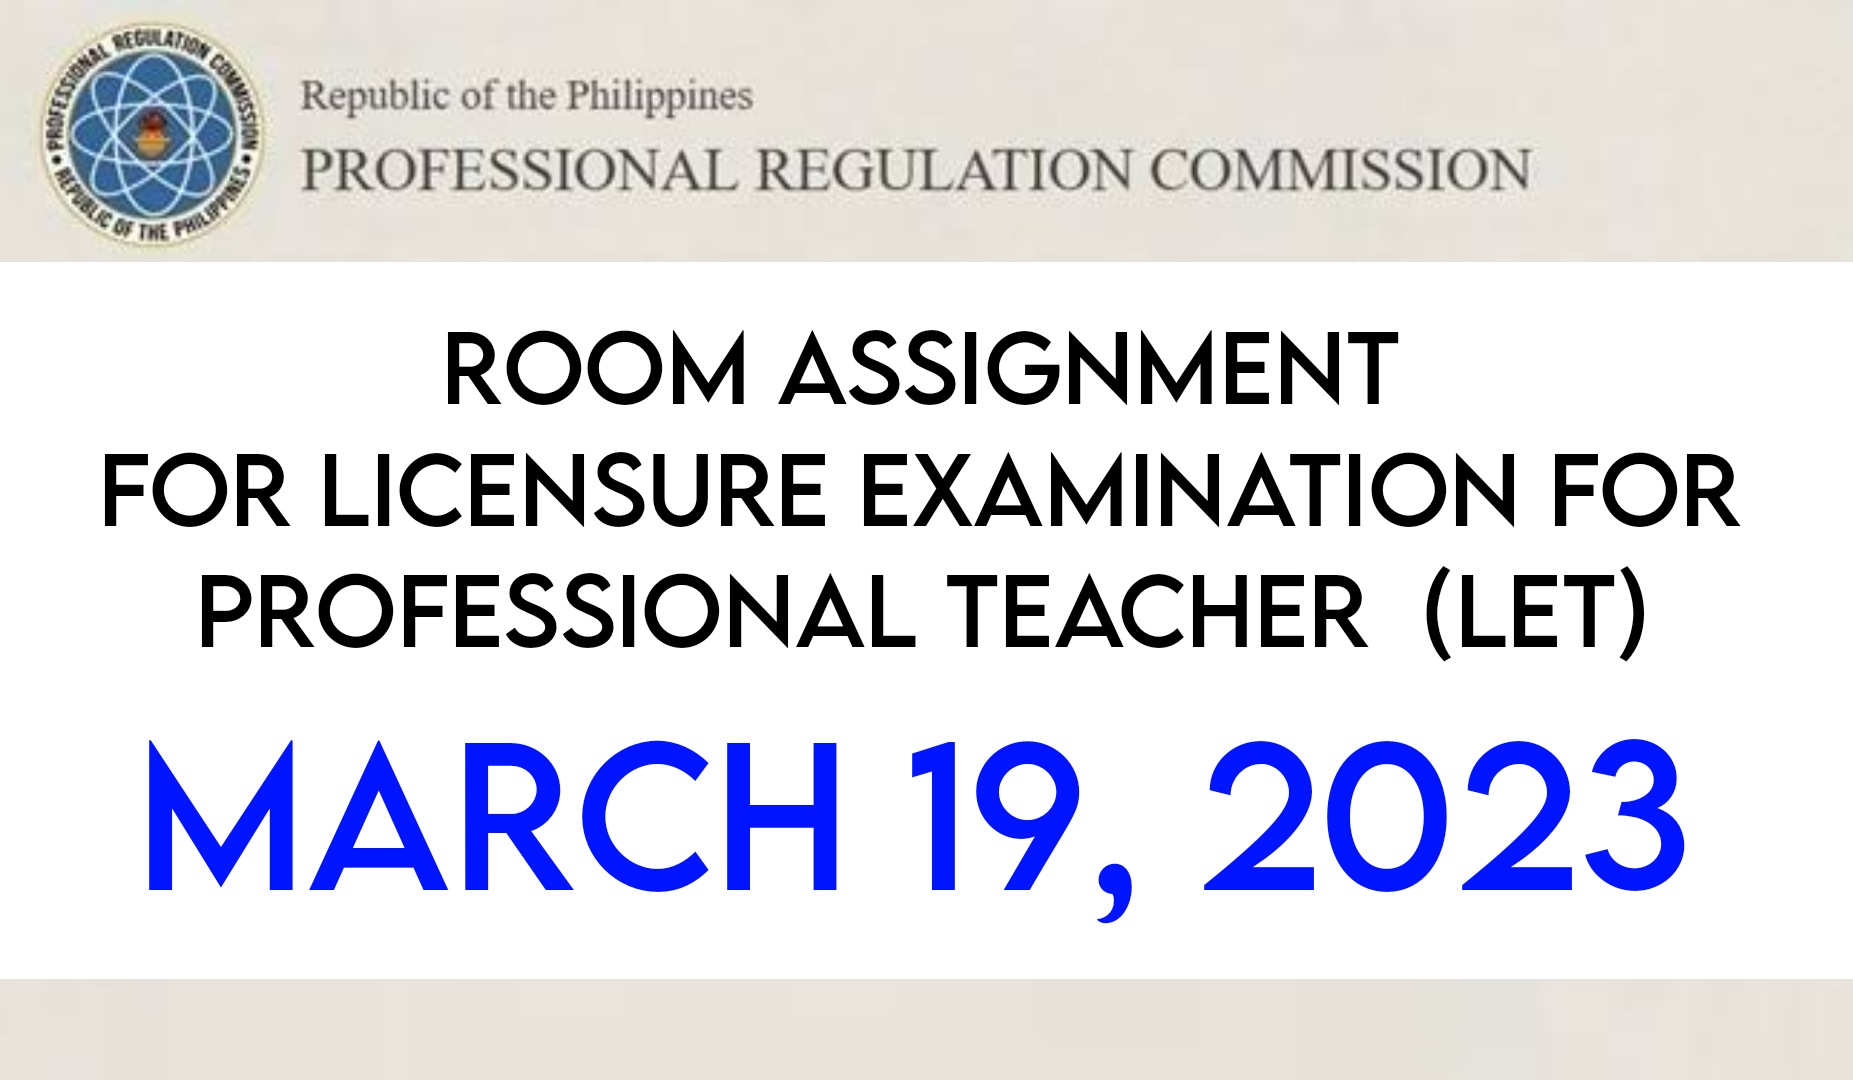 prc room assignment let march 2023